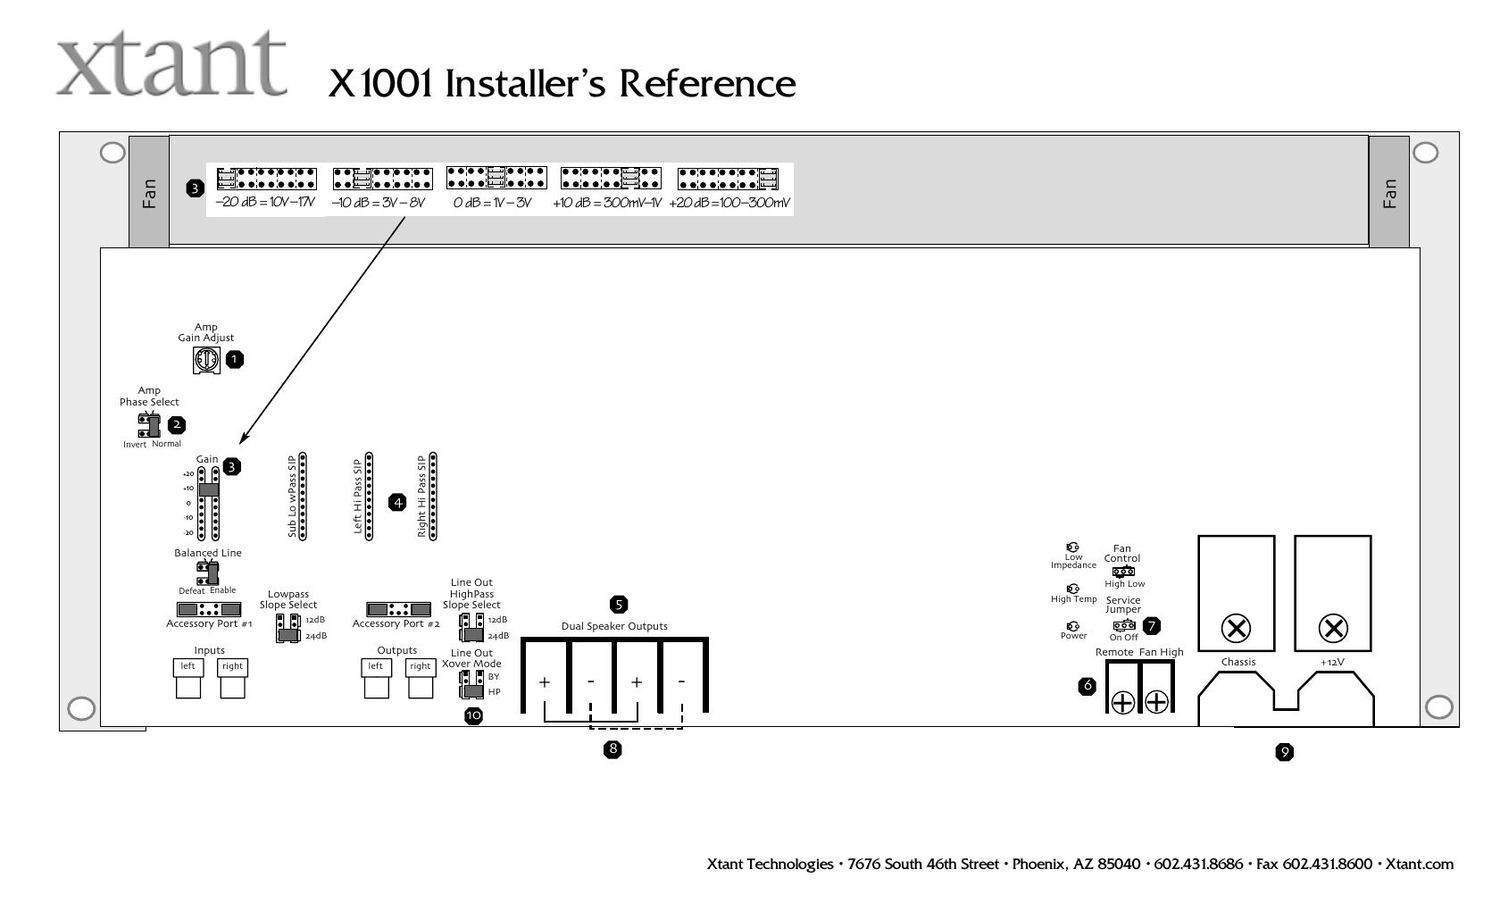 xtant x 1001 owners manual